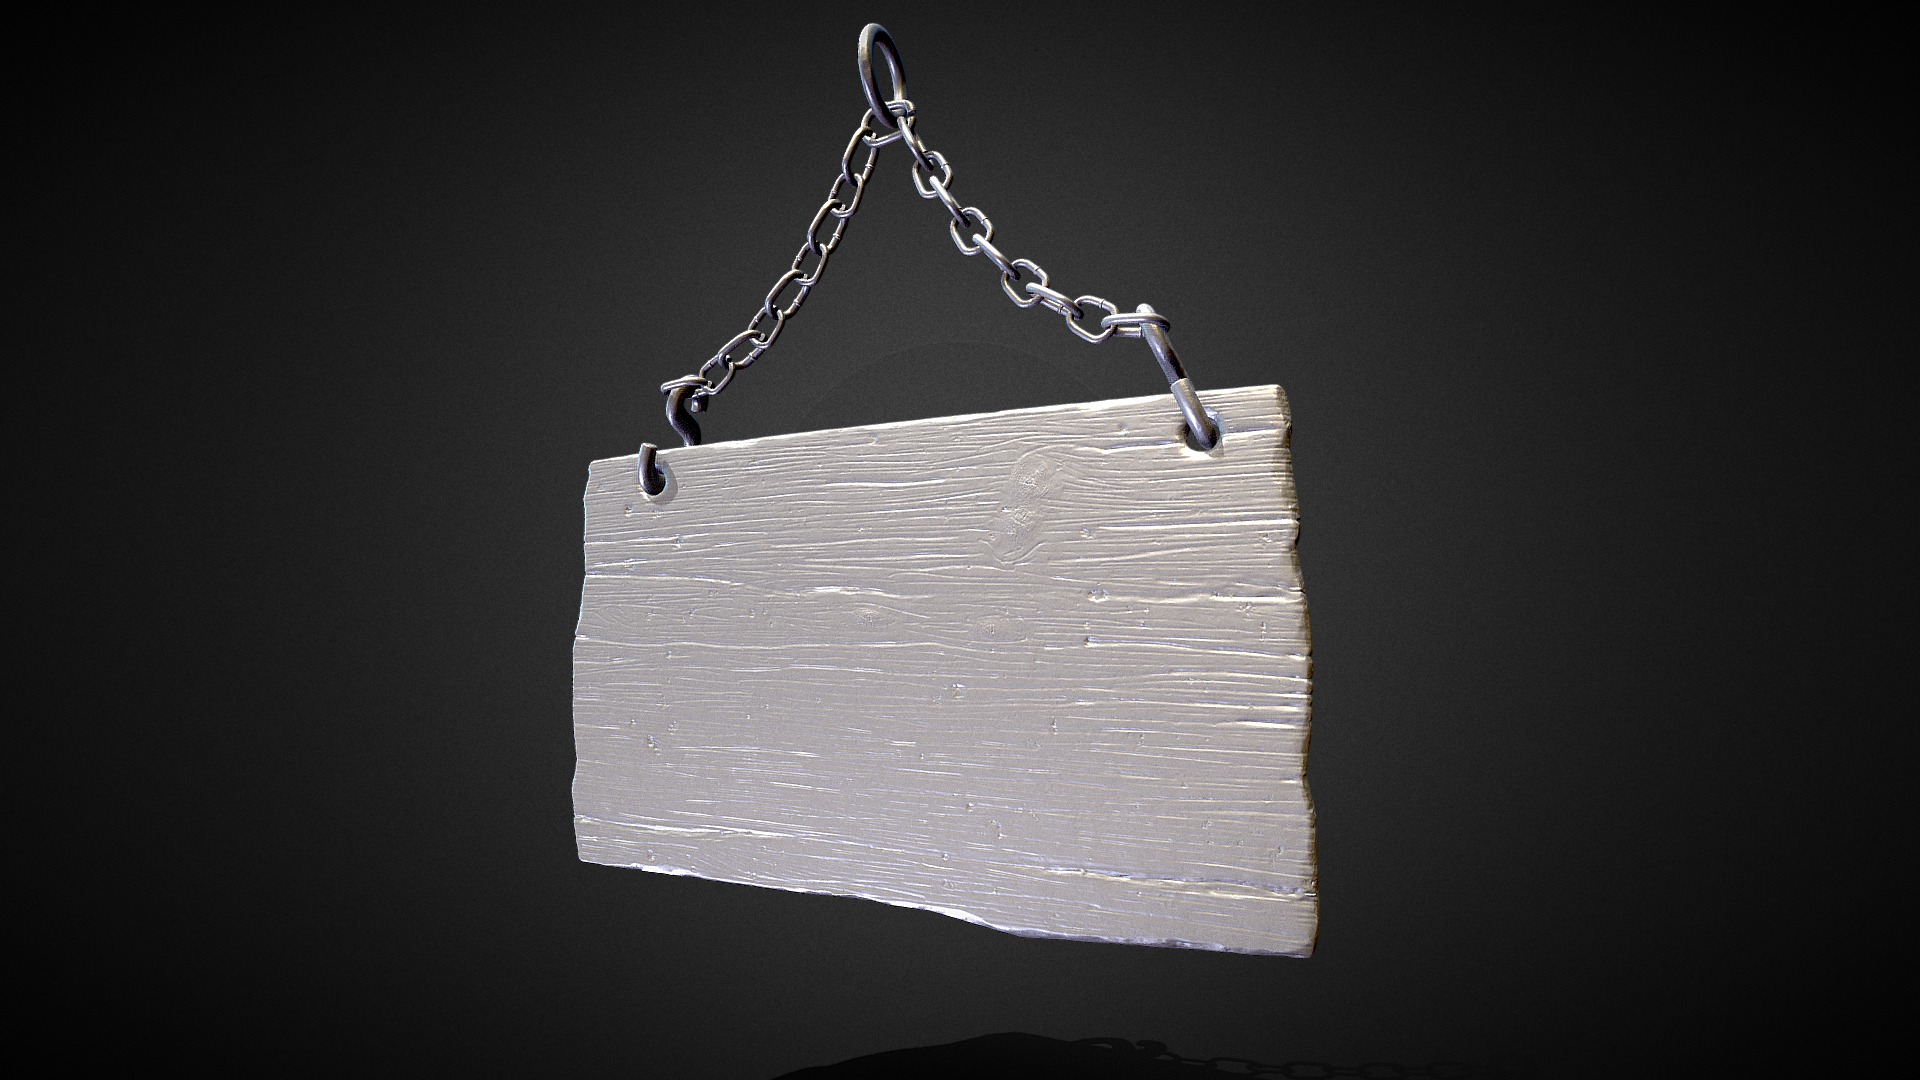 3D model 3D Wooden Sign With Chains – High Poly - This is a 3D model of the 3D Wooden Sign With Chains - High Poly. The 3D model is about a white piece of paper with a black background.